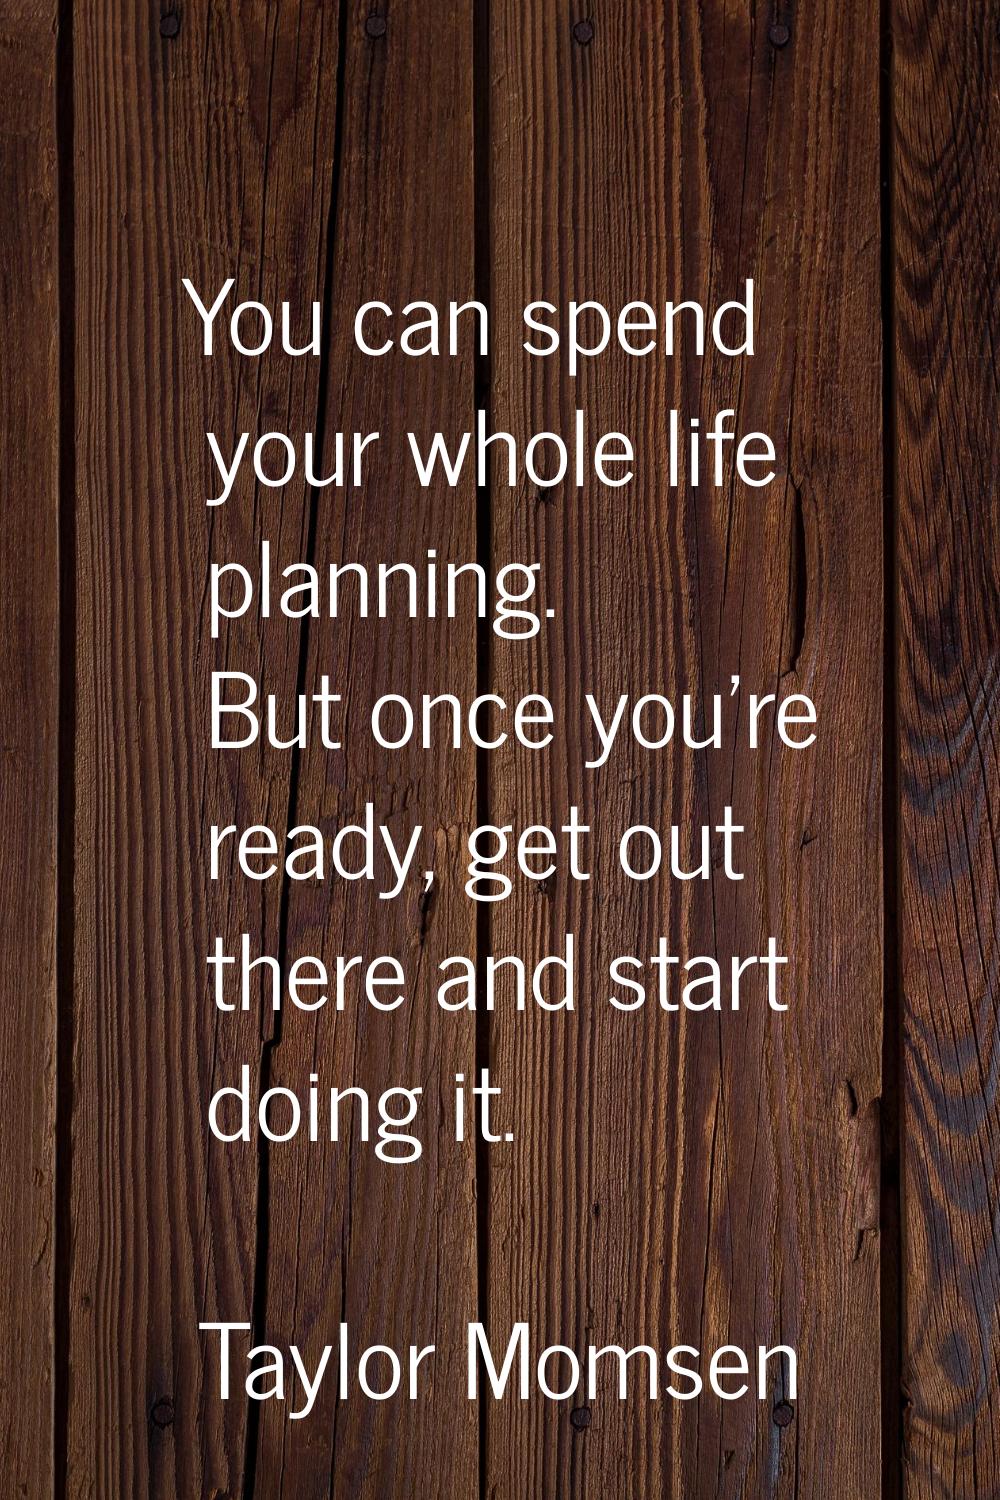 You can spend your whole life planning. But once you're ready, get out there and start doing it.